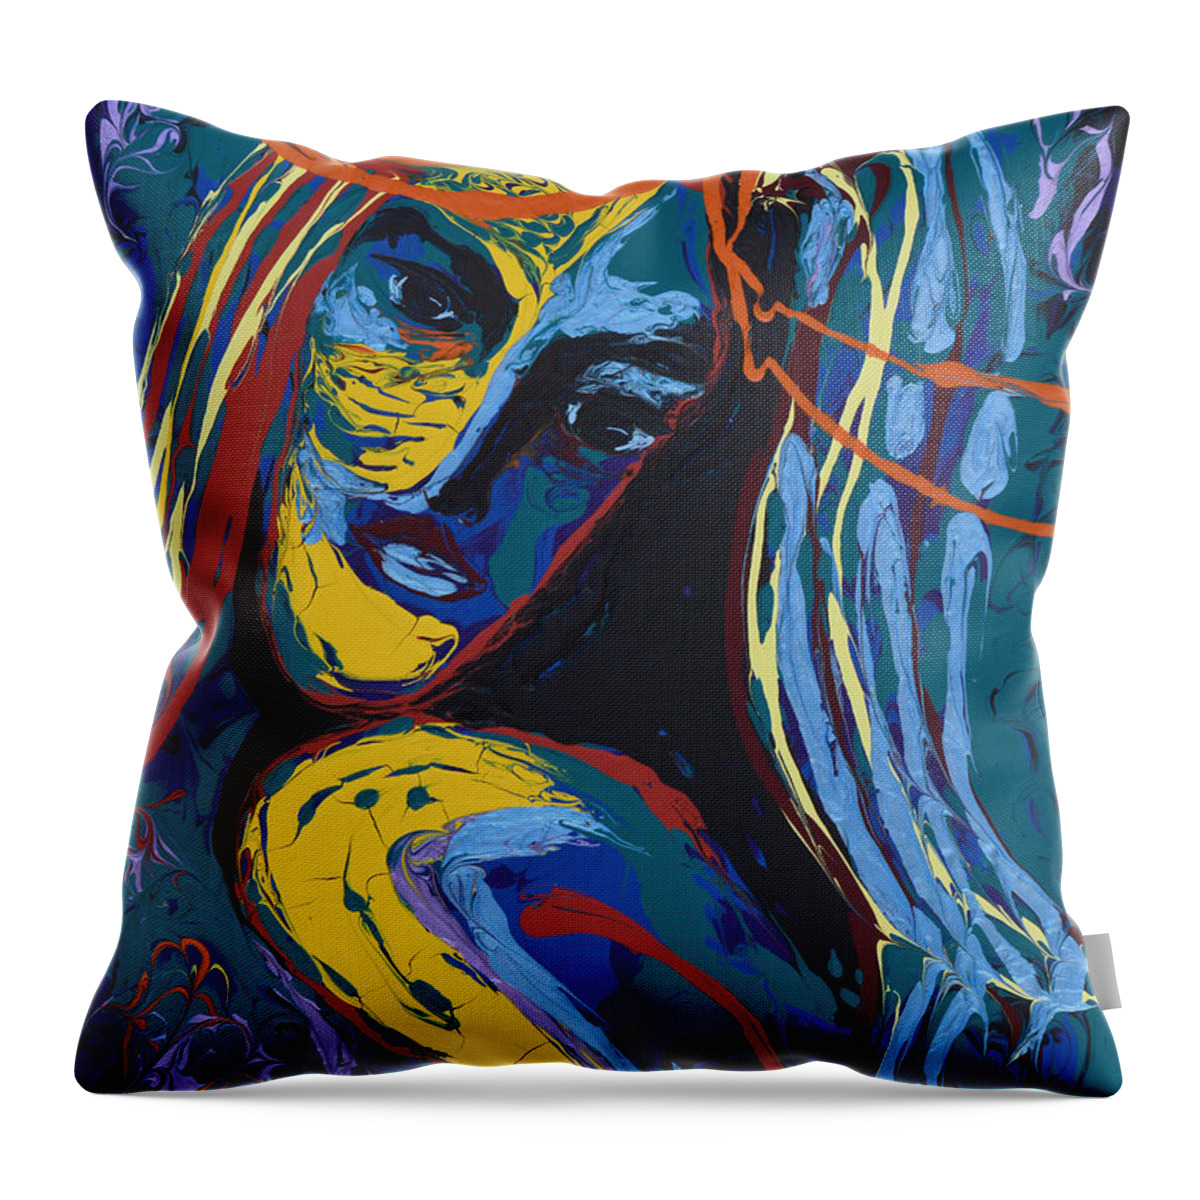 Portrait Throw Pillow featuring the painting Wild At Heart by Donna Blackhall